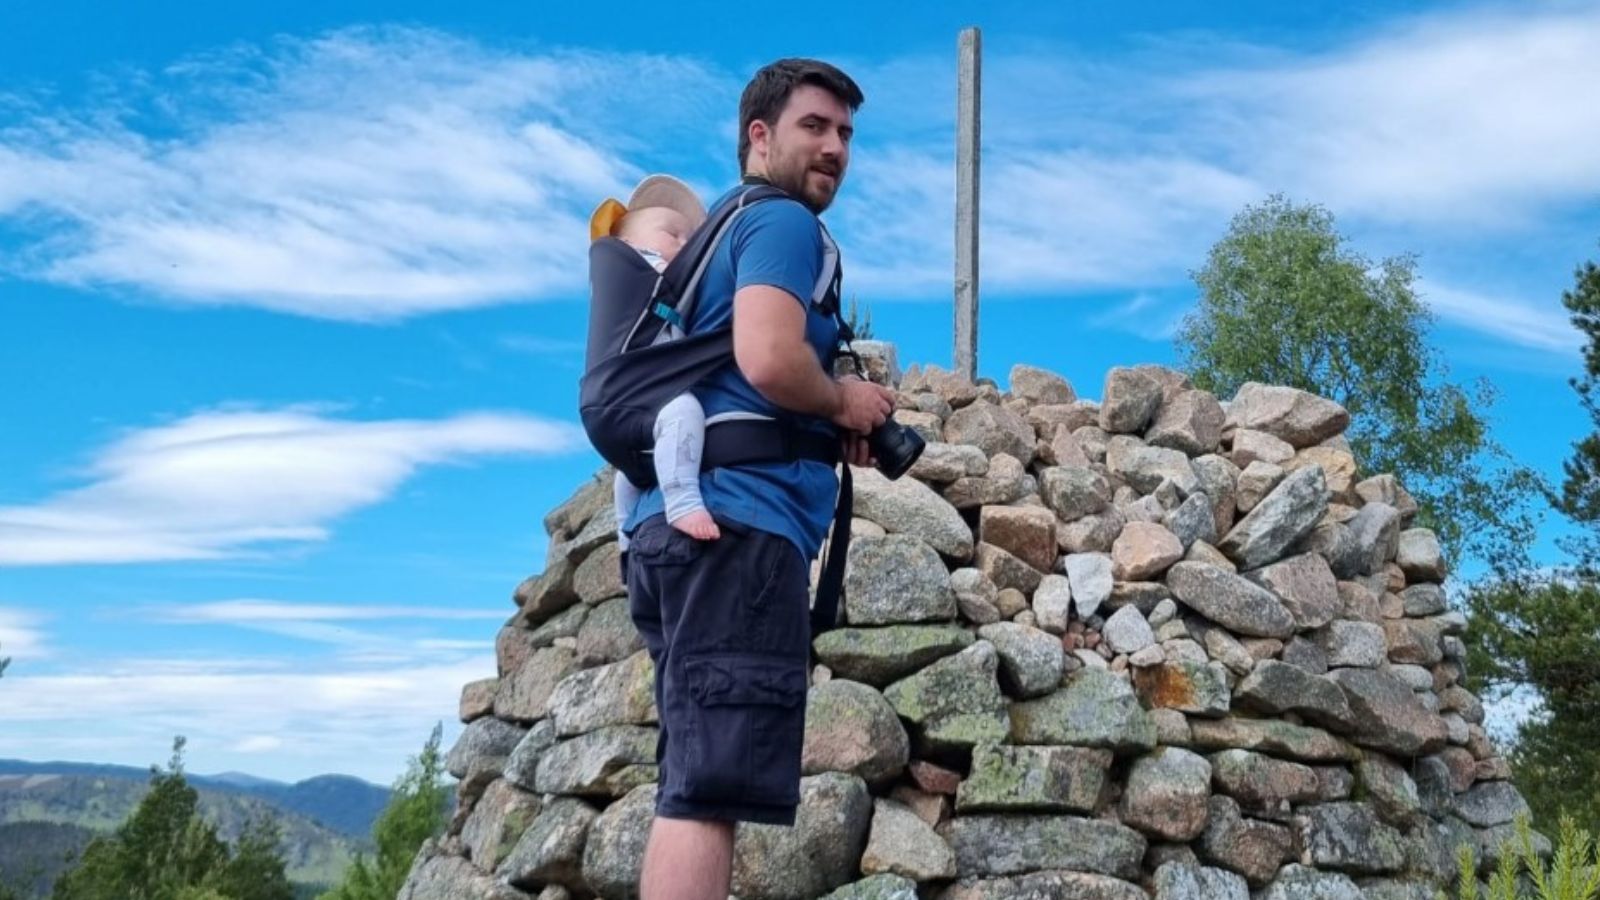 Man carrying baby on his back in Cococho baby carrier